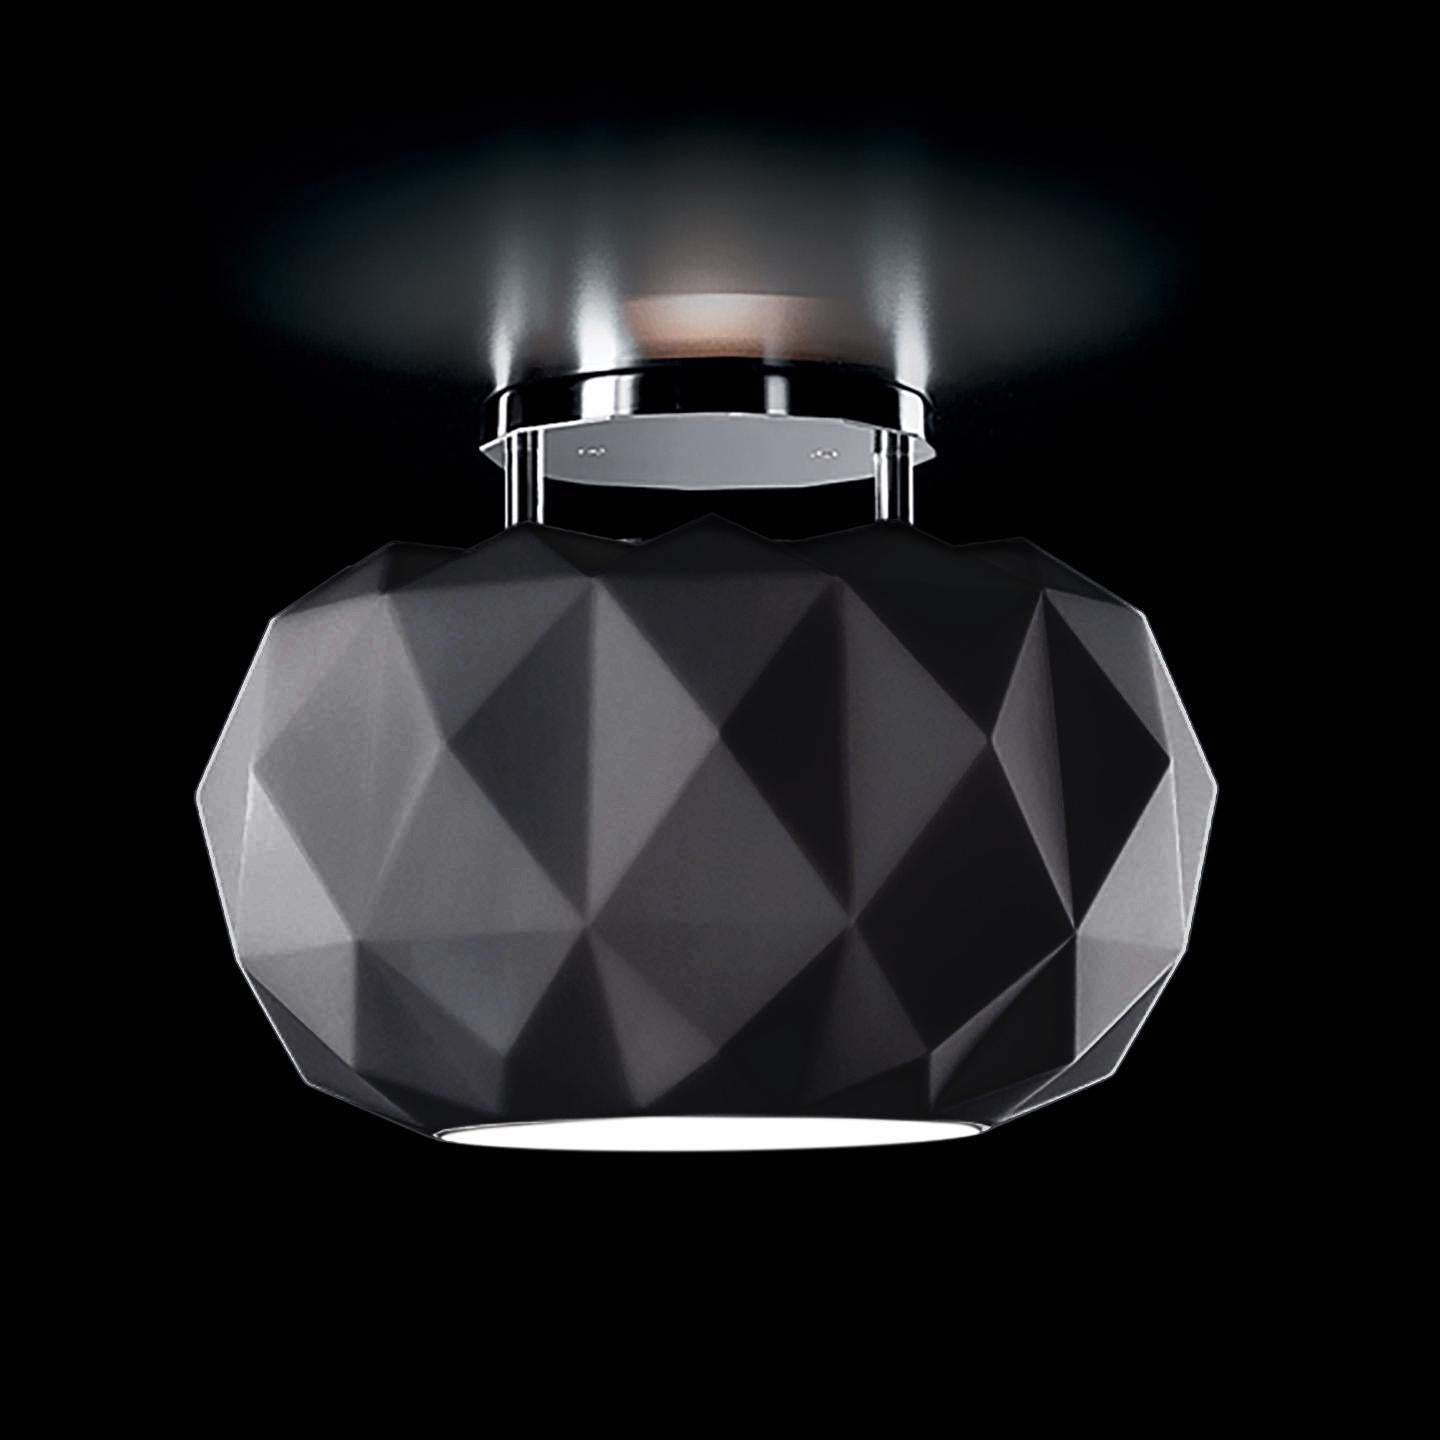 Leucos Deluxe PL 35 Flush Mount in Matte Black and Chrome by Archirivolto For Sale